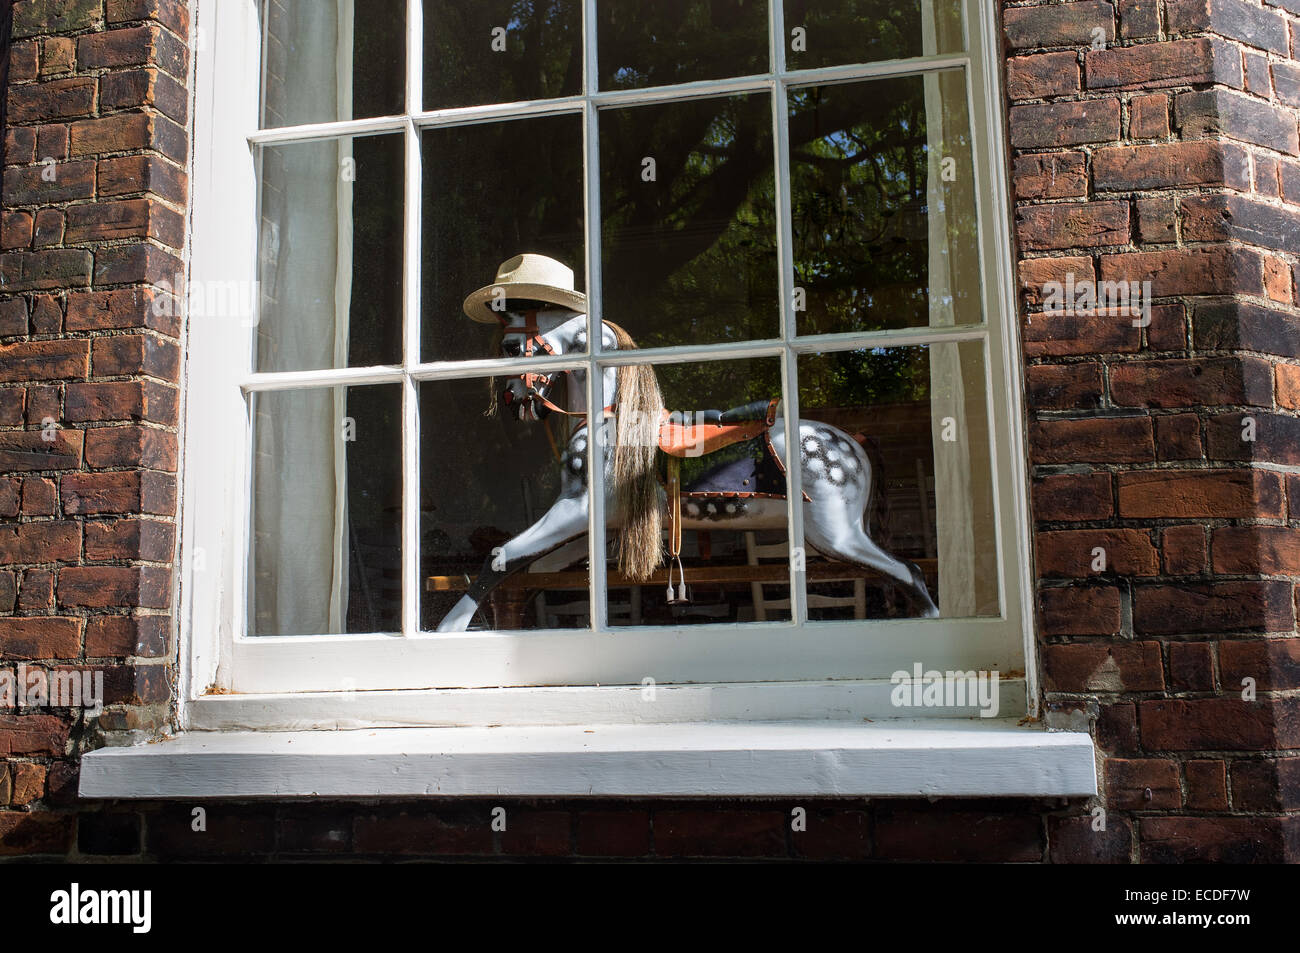 Rocking Horse Wearing Straw Hat in Window of House Stock Photo